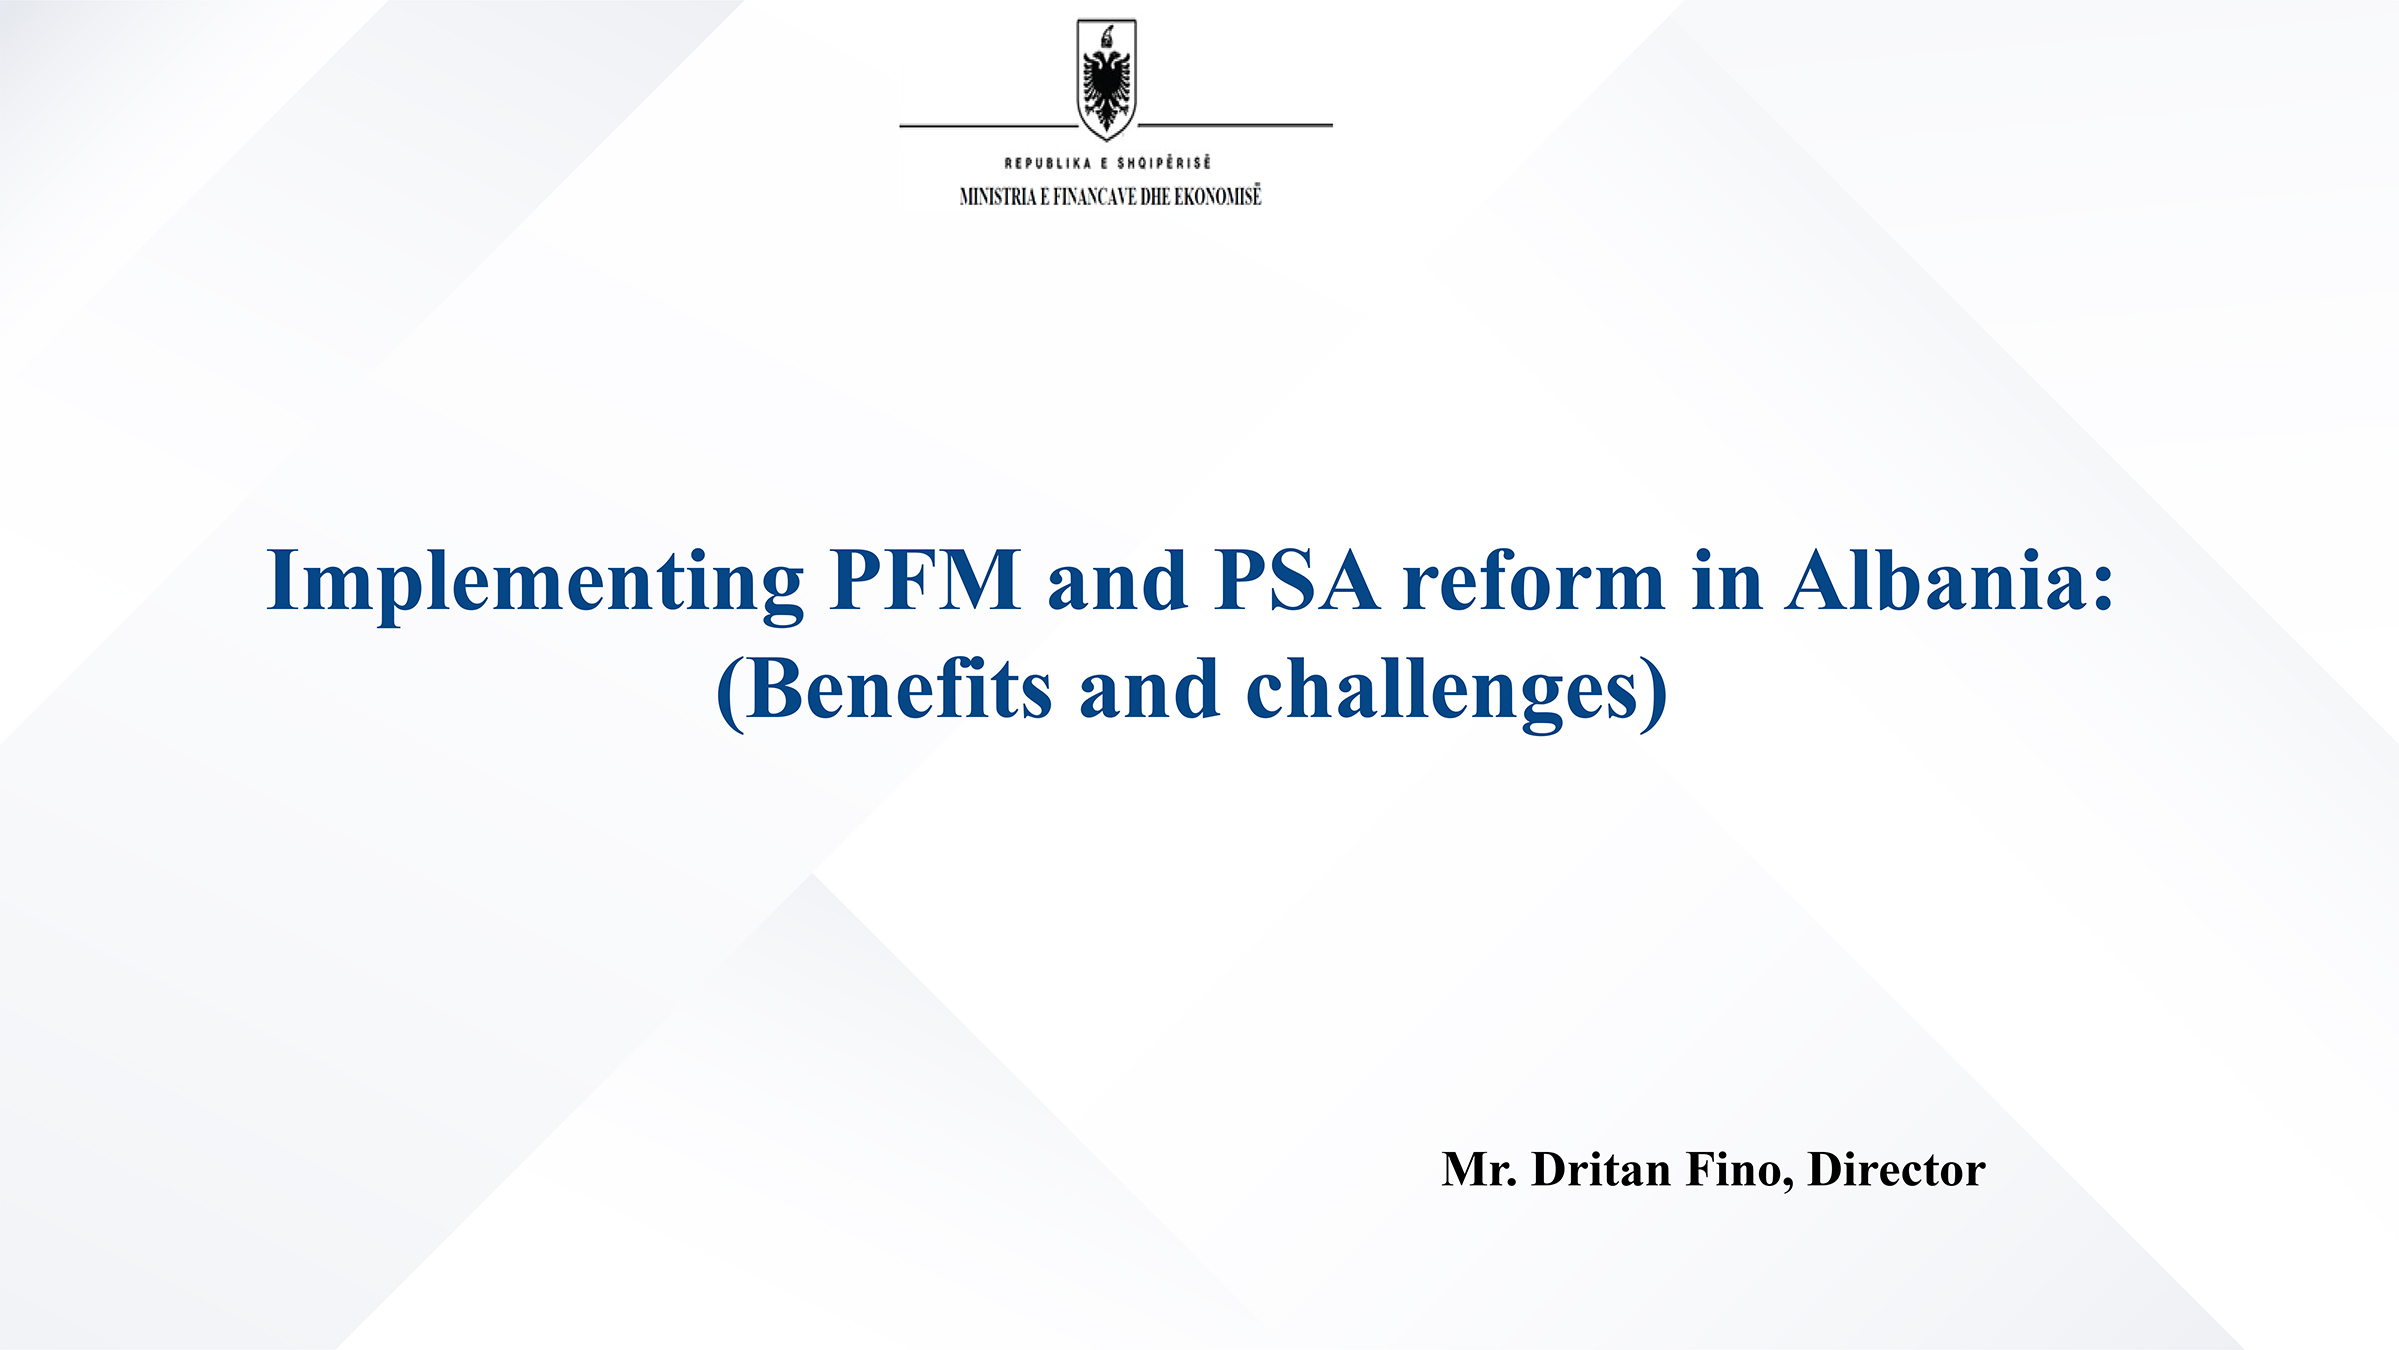 Implementing PFM and PSA reform in Albania: Benefits and challenges